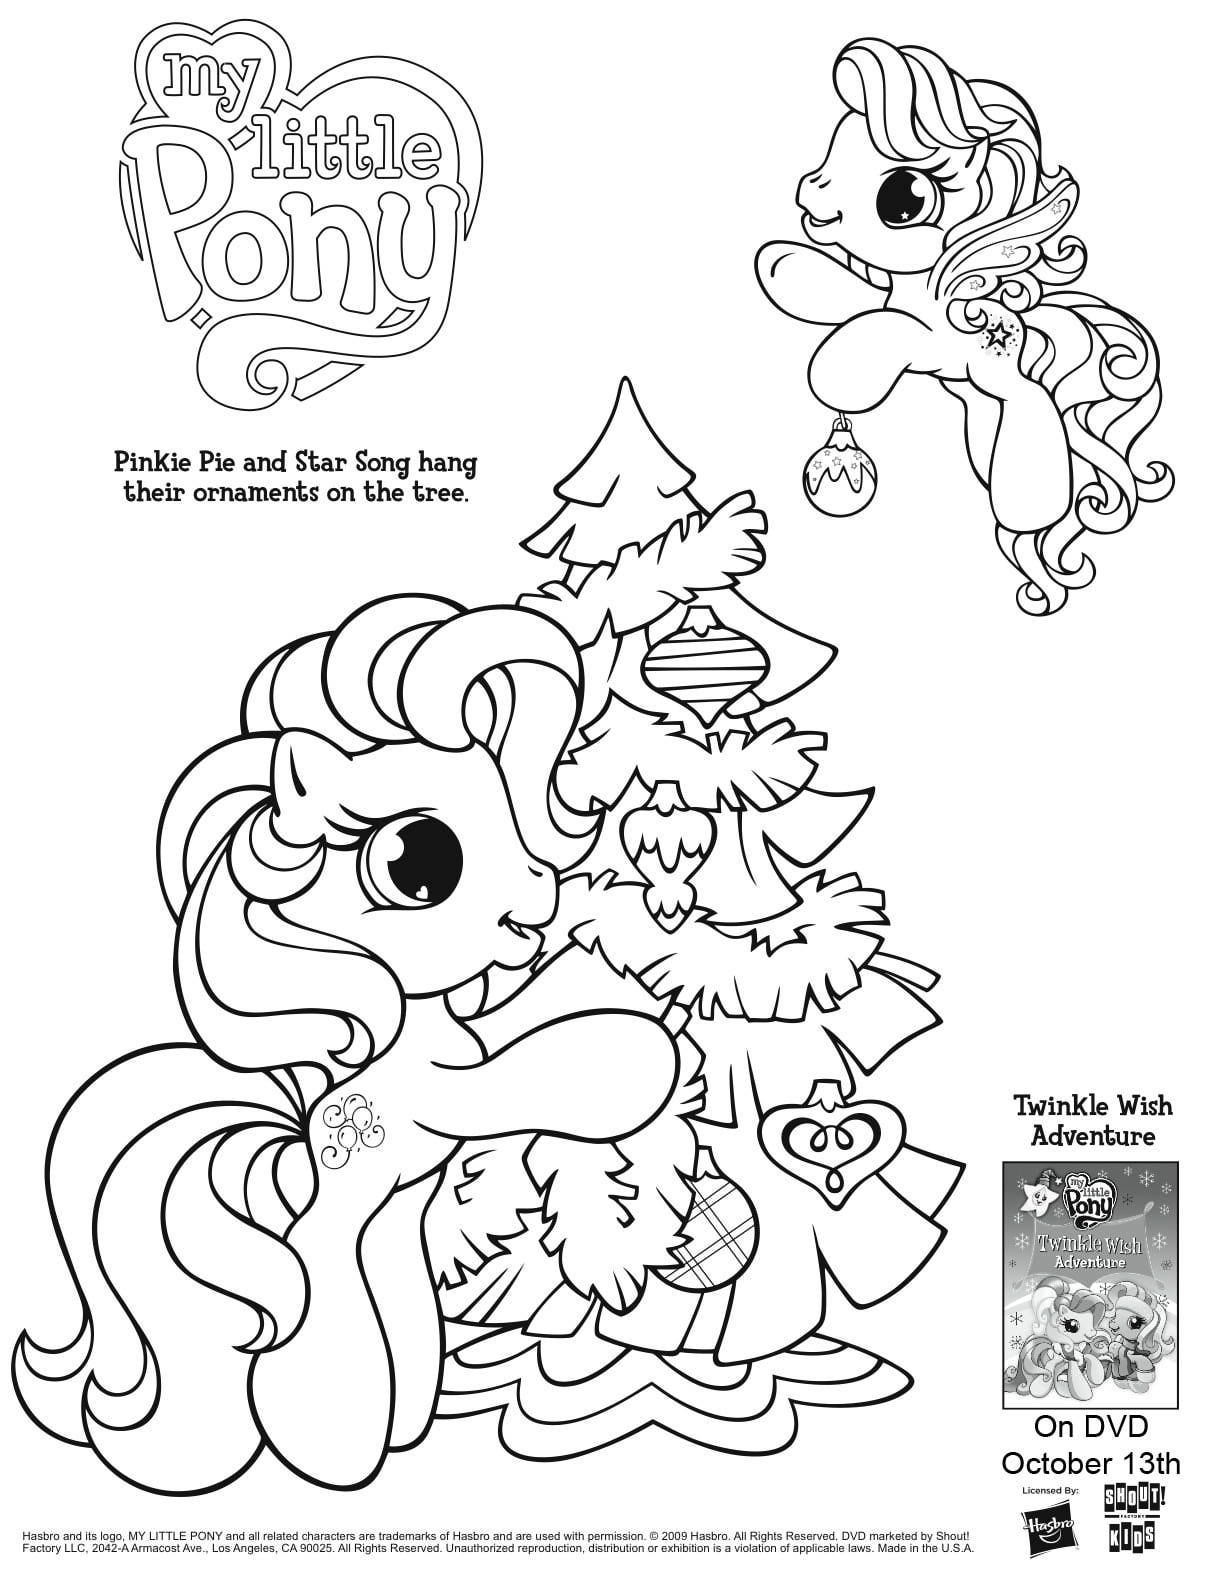  My little pony coloring pages | girl coloring pages | color pages | #4